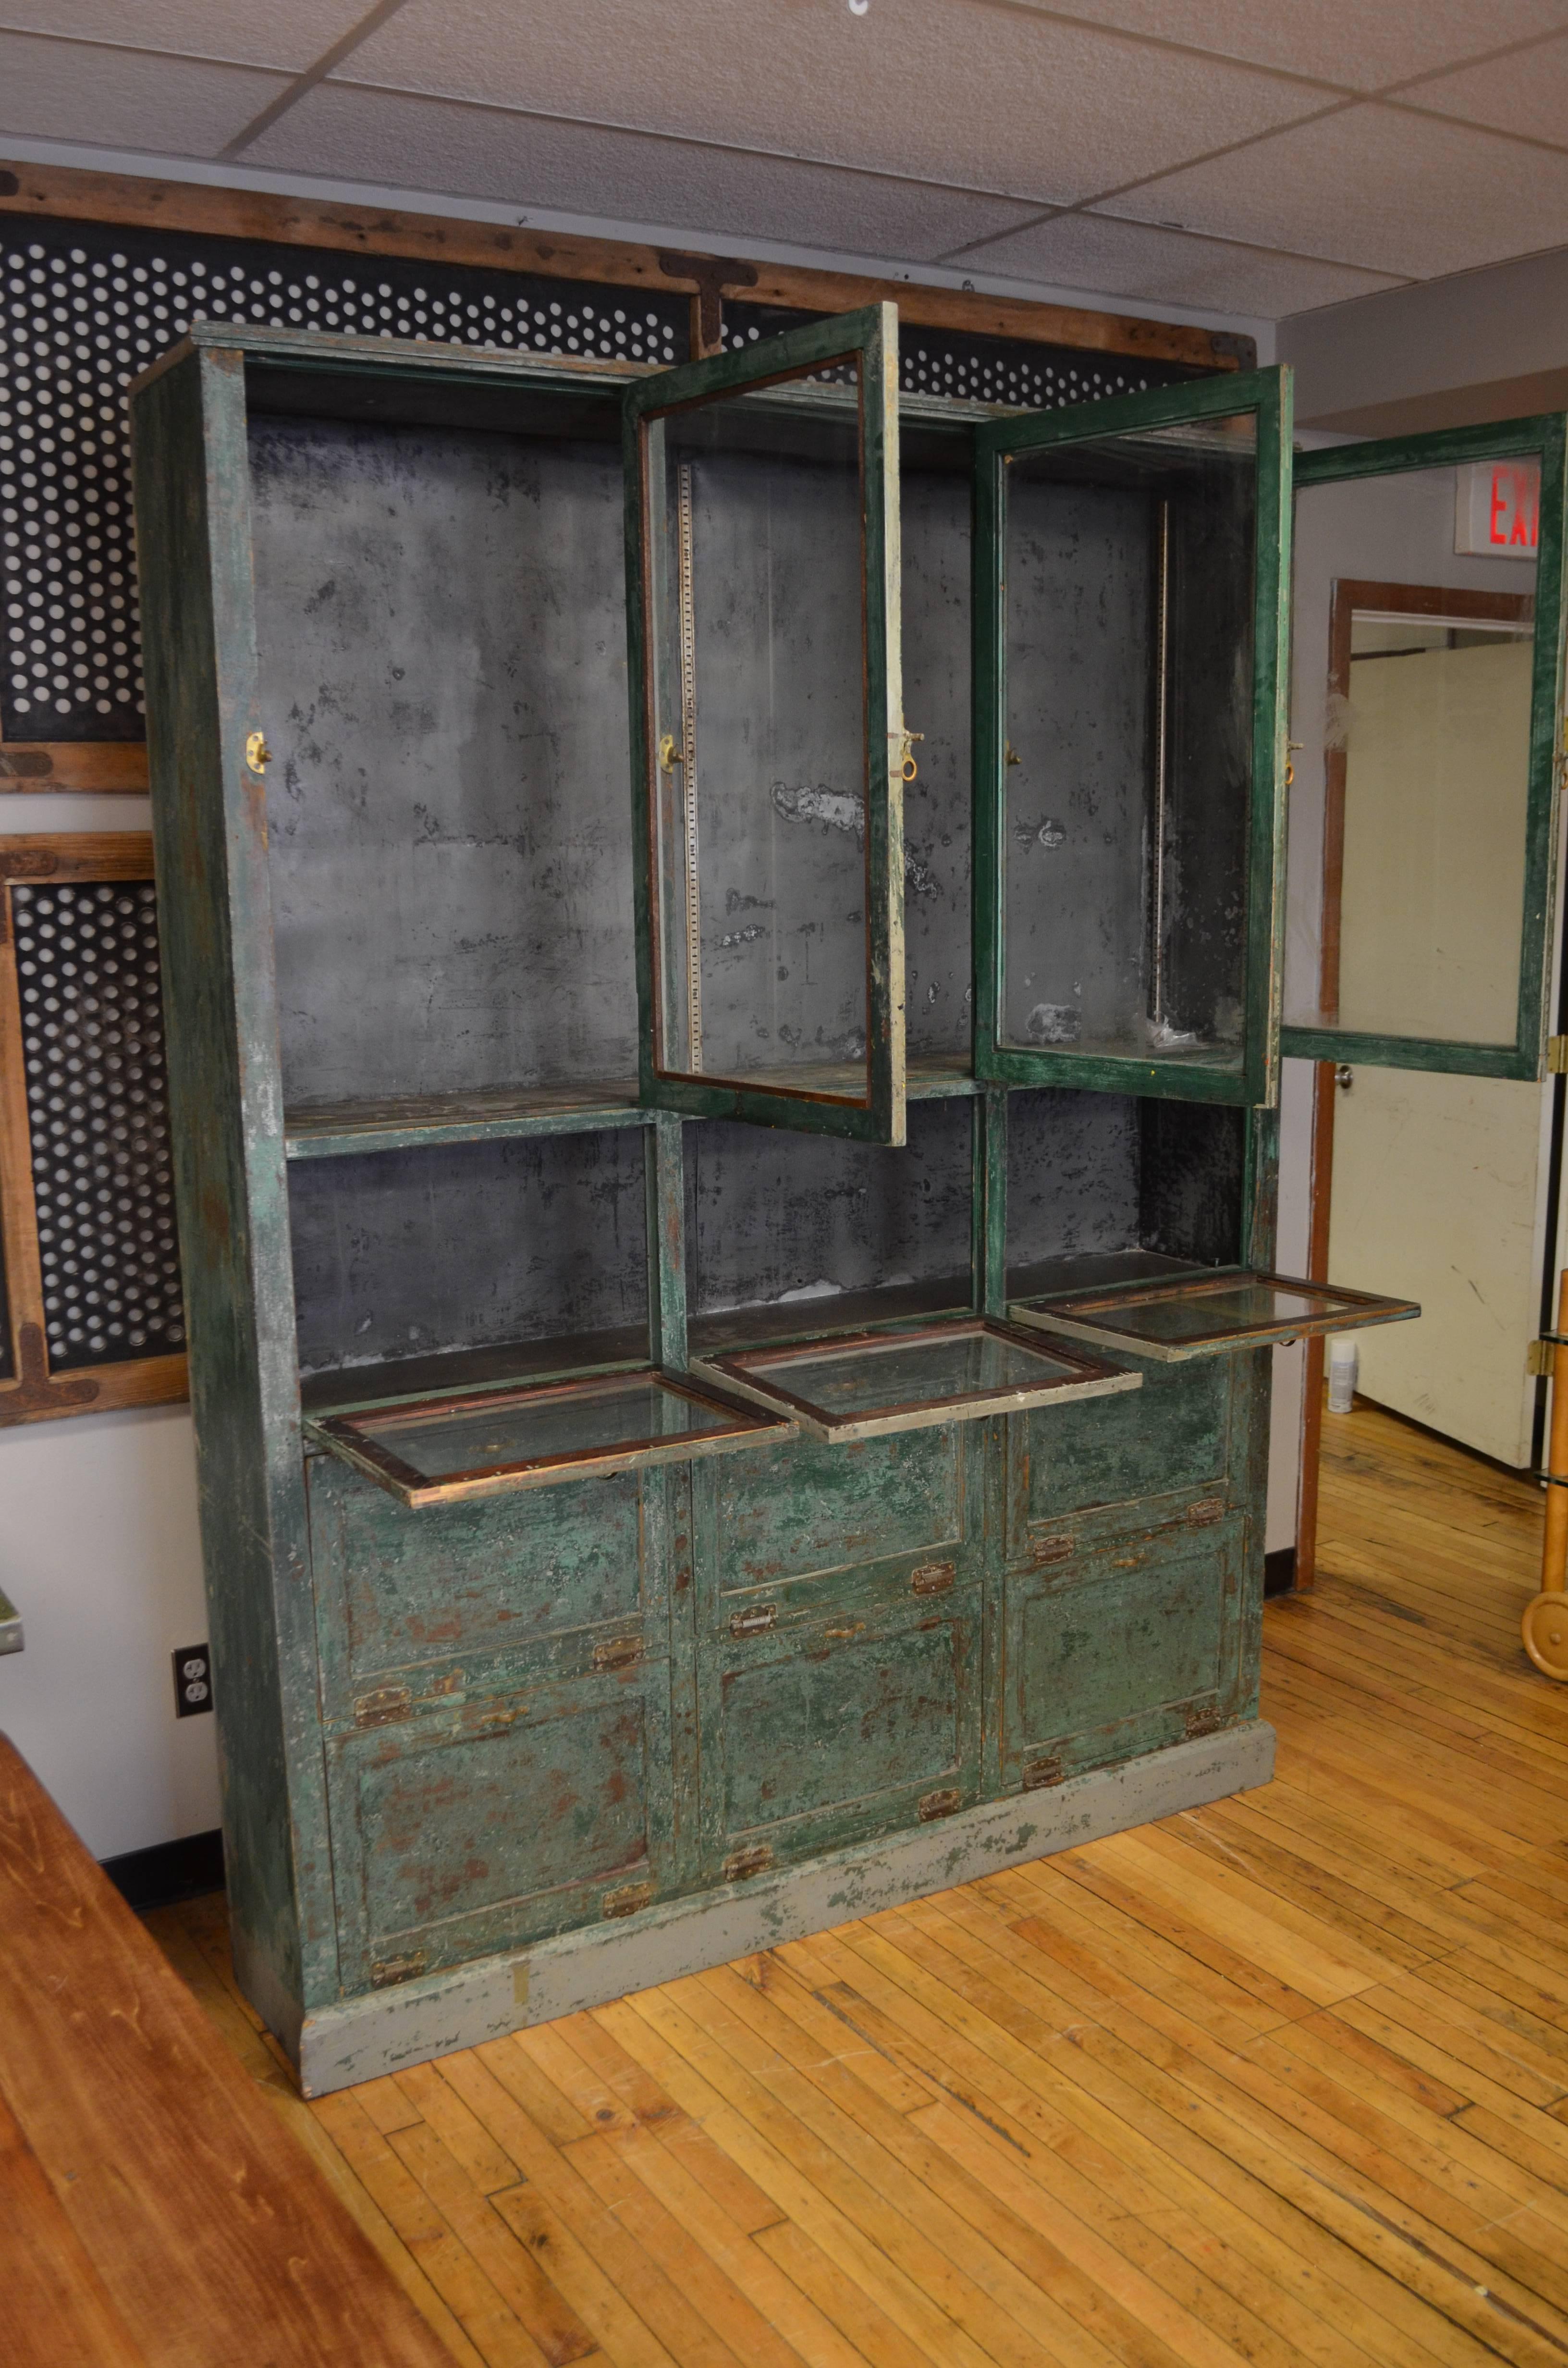 Storage cabinet and cupboard is from the late 1800s. Was used as a humidor in small town pharmacy in the Midwest. Beautifully constructed with original glass on doors, spring loaded hinges on cupboard doors. Lined with zinc inside to preserved